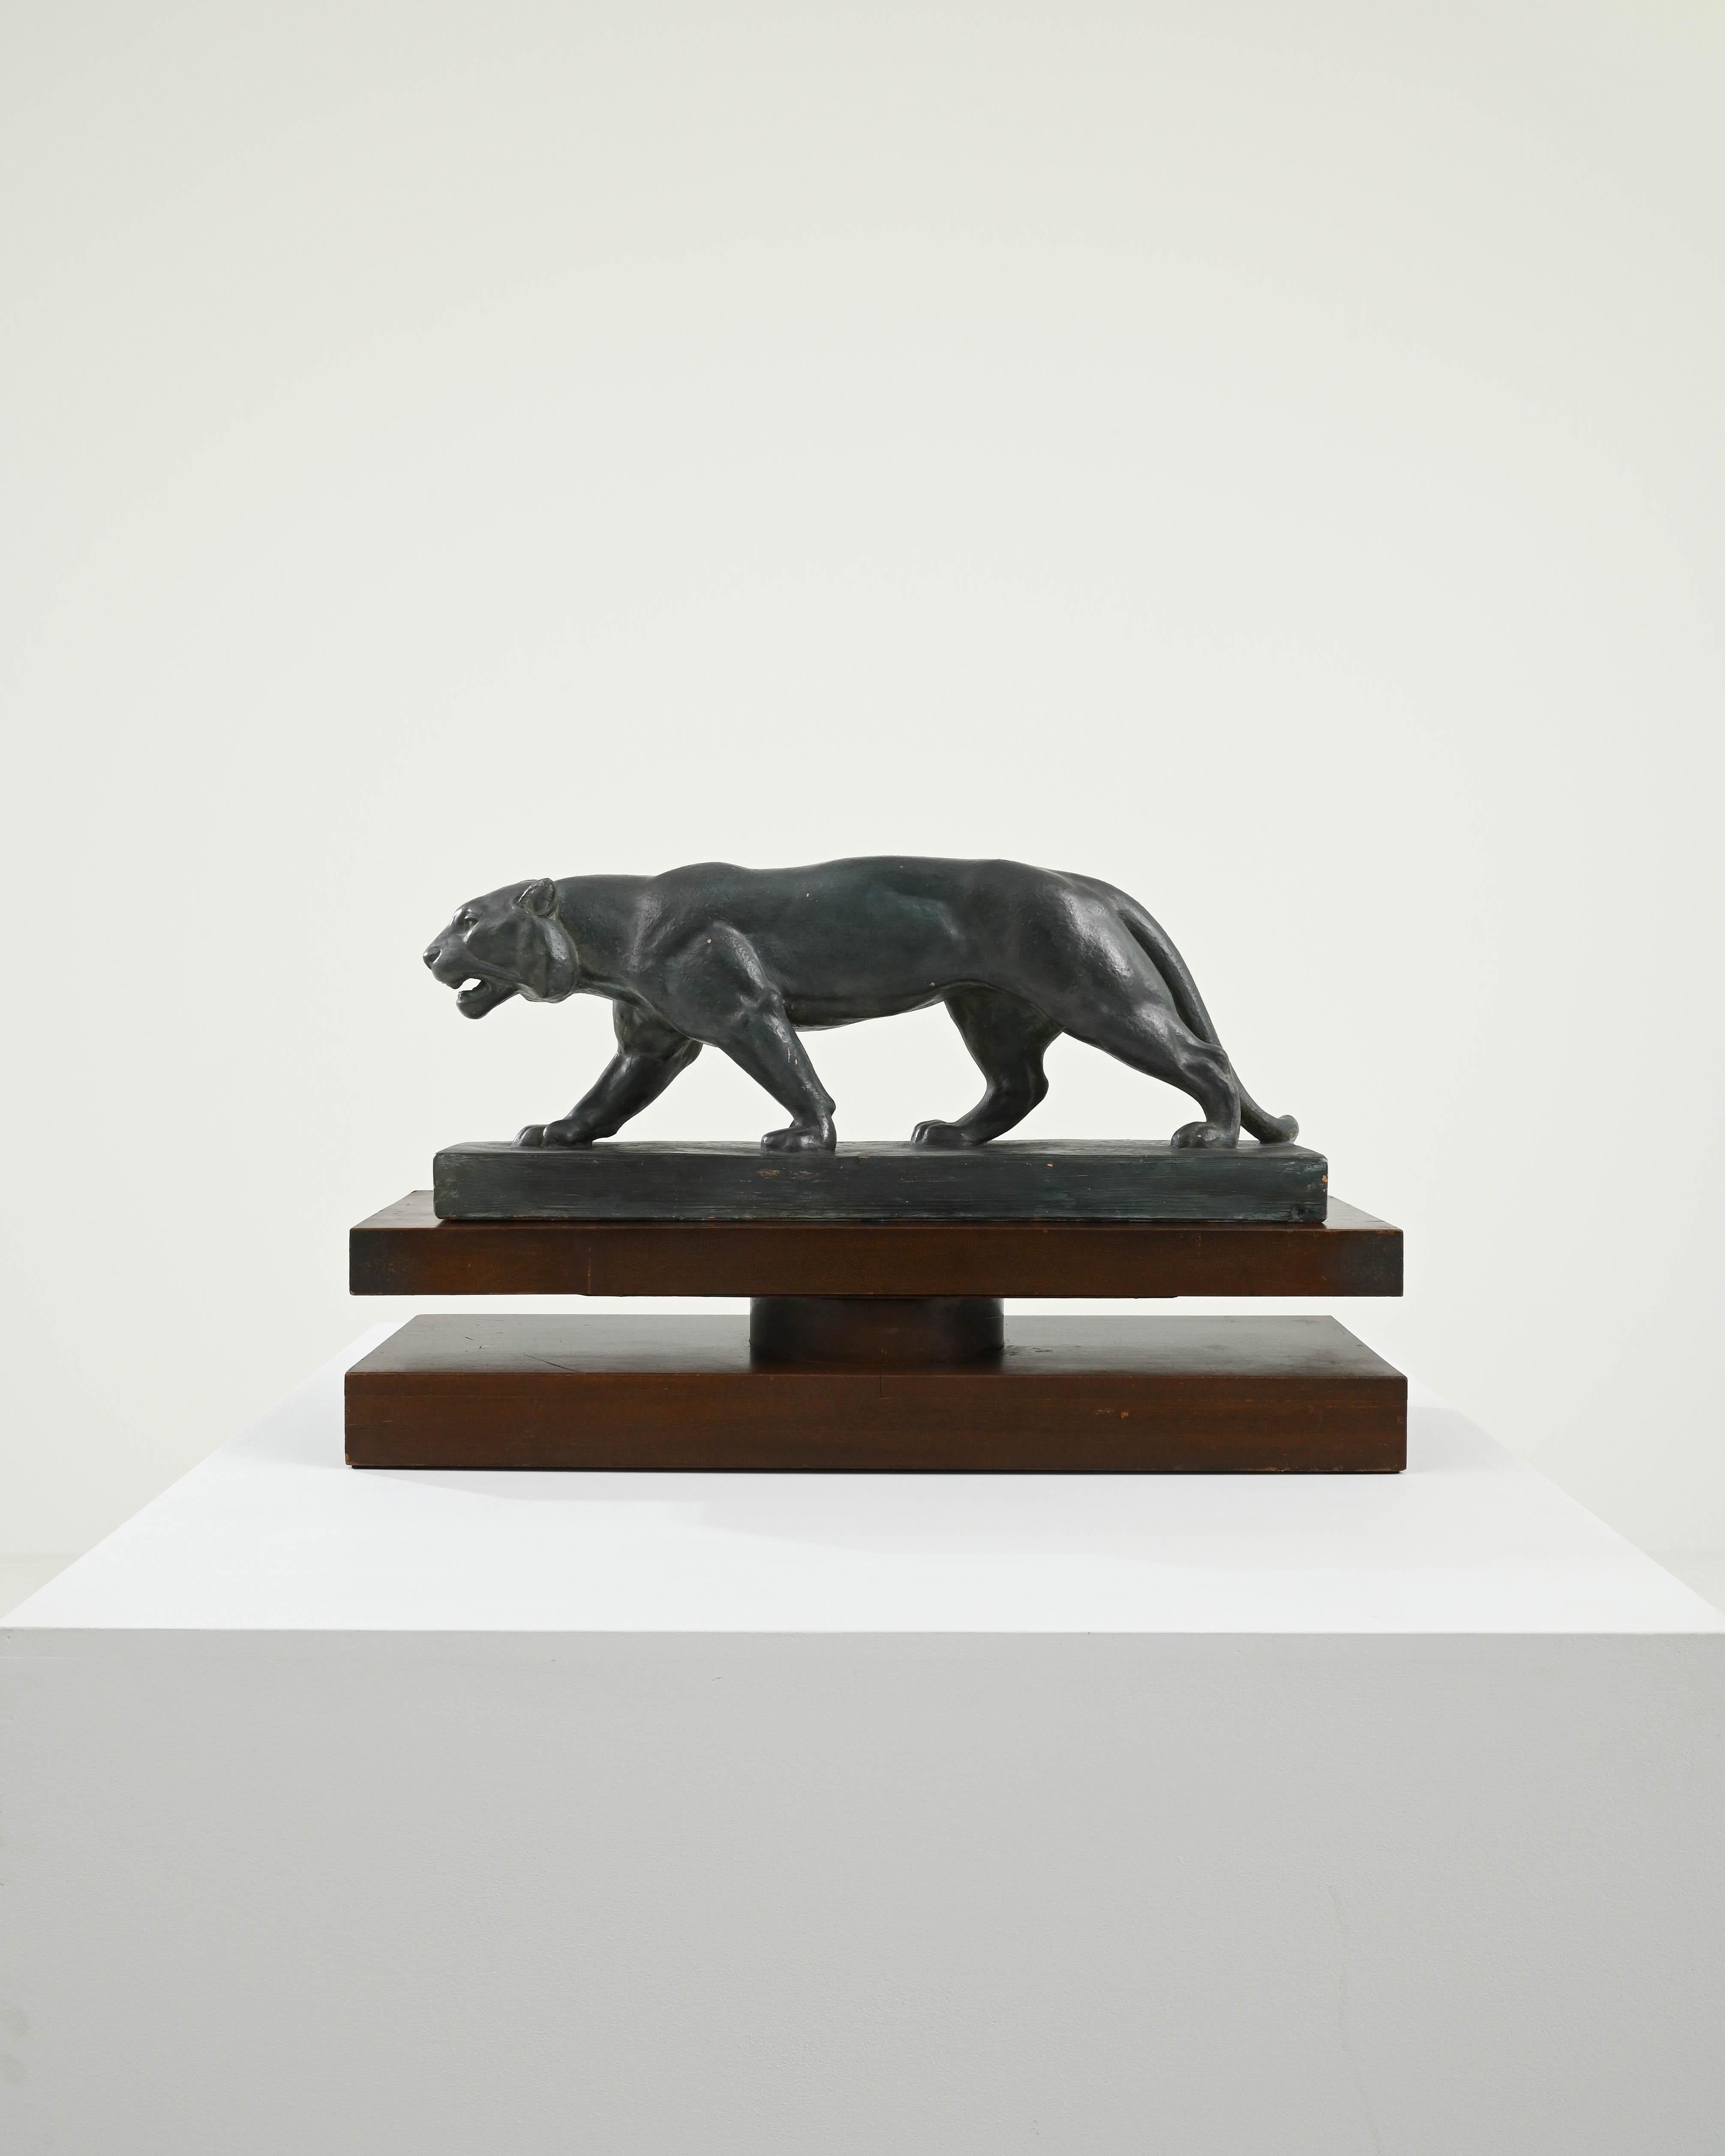 This elegant vintage plaster sculpture depicts a jaguar in motion; head slightly lowered, placing one foot in front of the other with perfect equilibrium. Built in France in the 20th century, the design reflects the Art Deco movement’s fascination